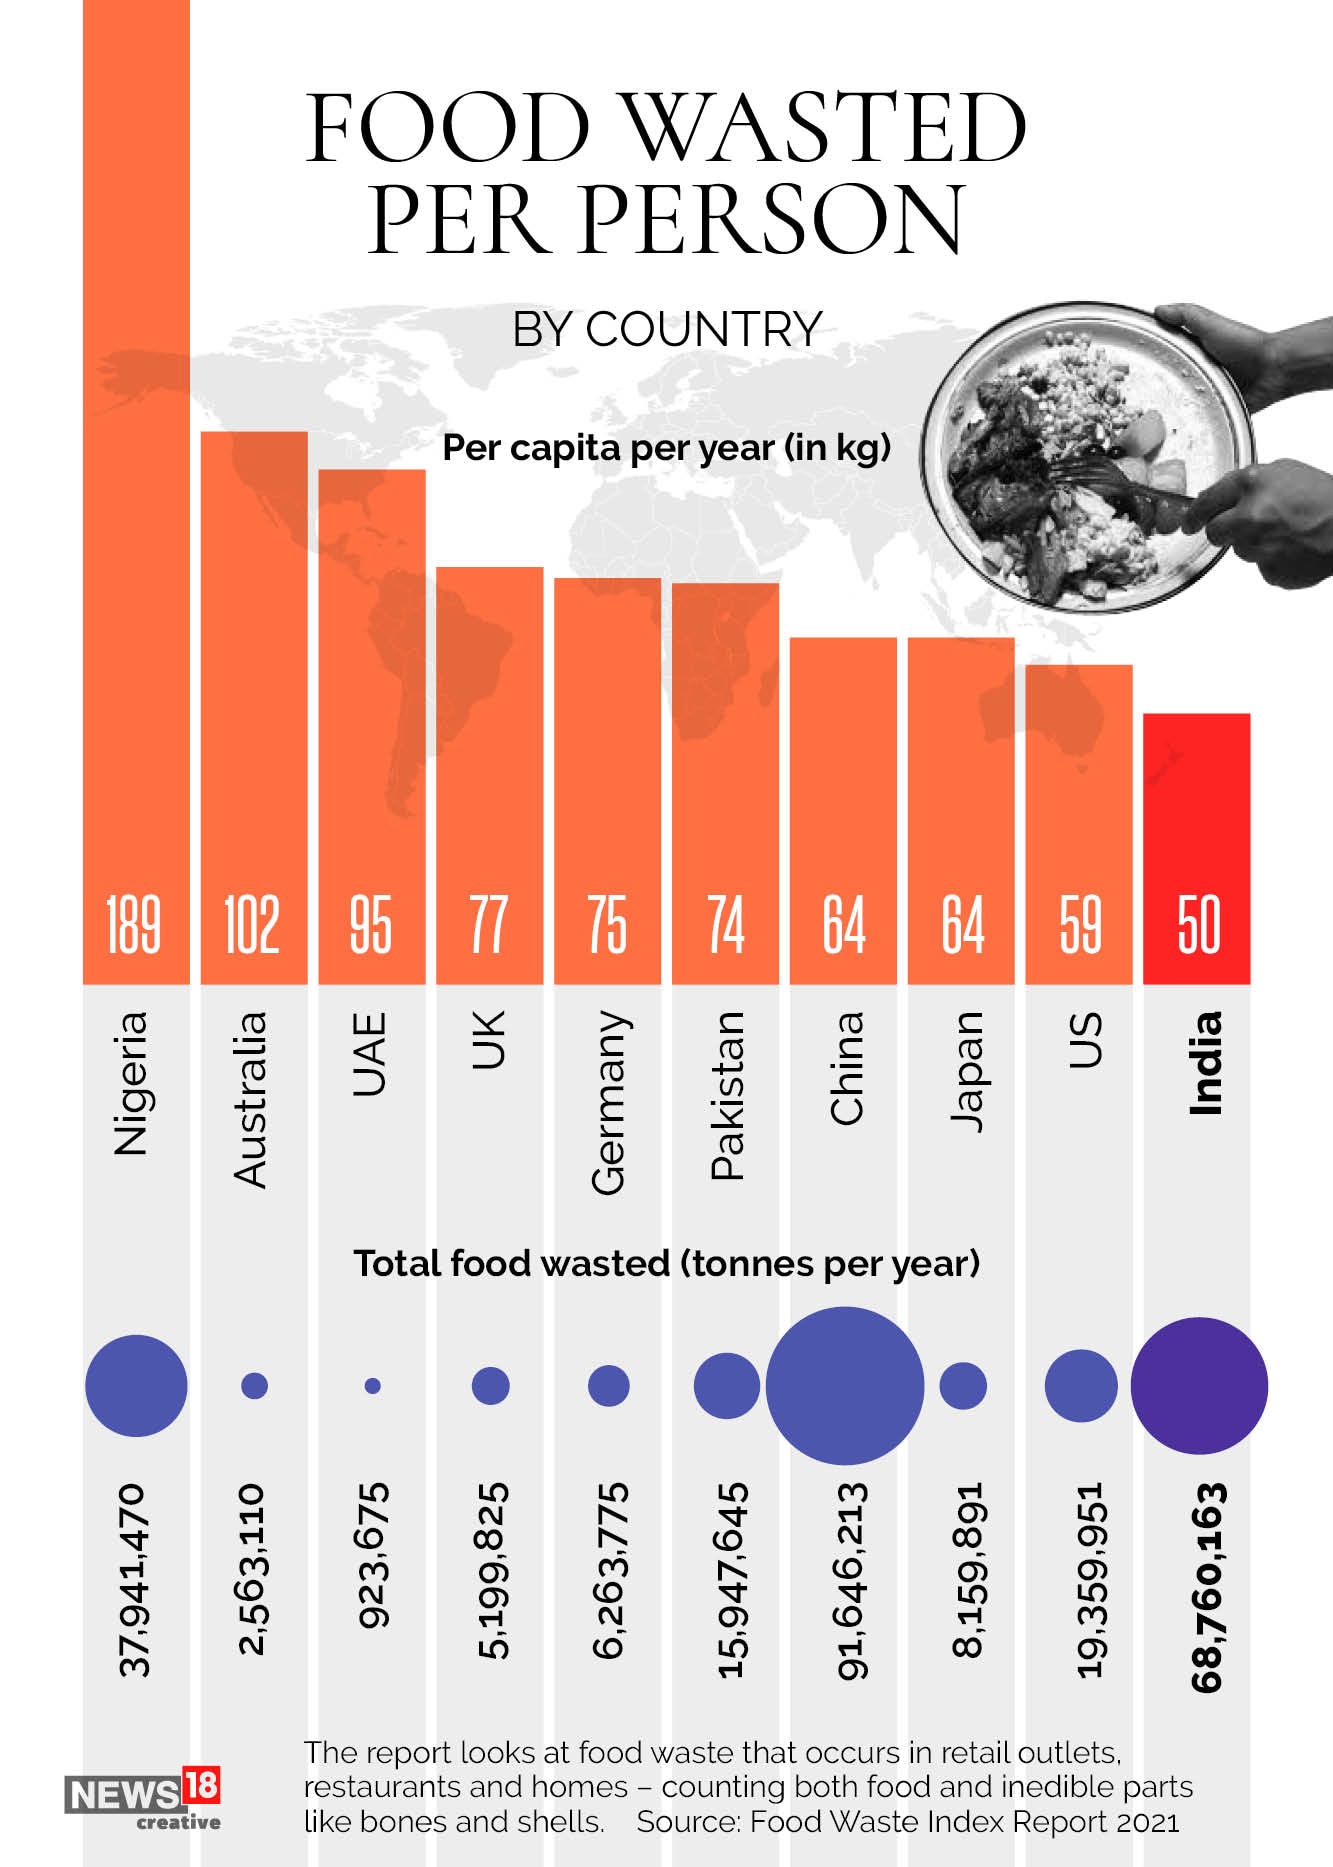 With Millions of Tons of Food Wasted Globally, Here's How Much We